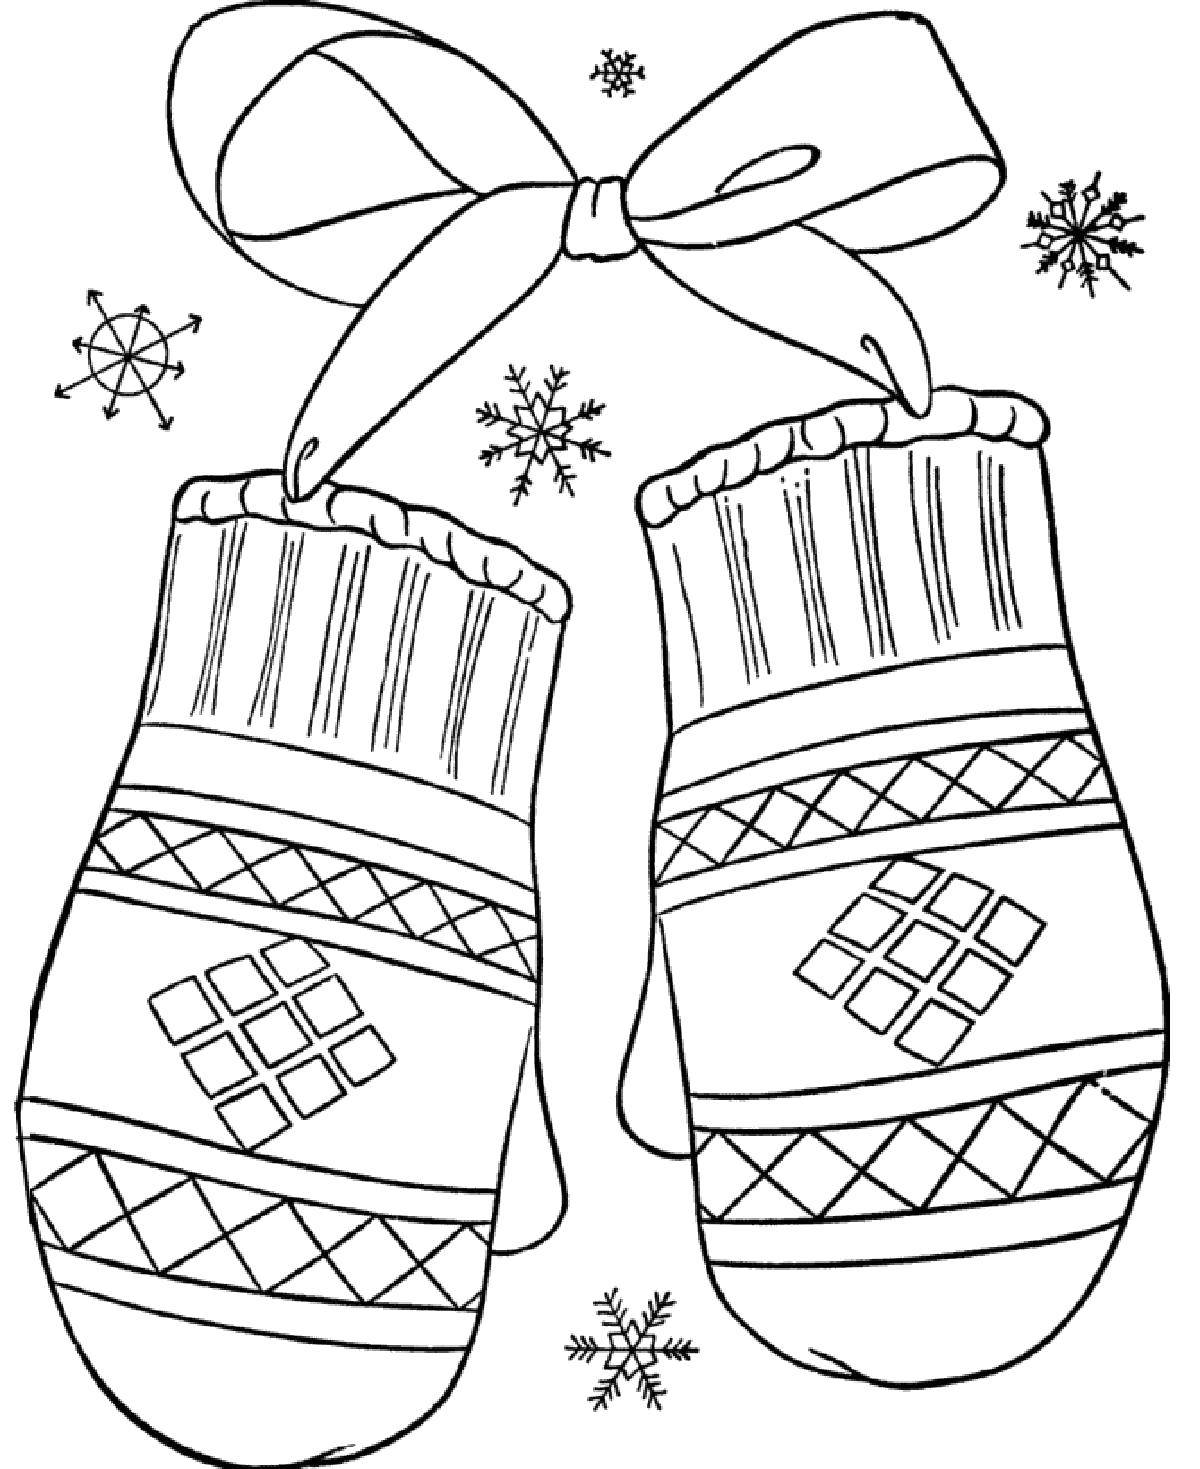 Coloring Christmas mittens. Category Clothing. Tags:  Clothing, mittens, geometric patterns.